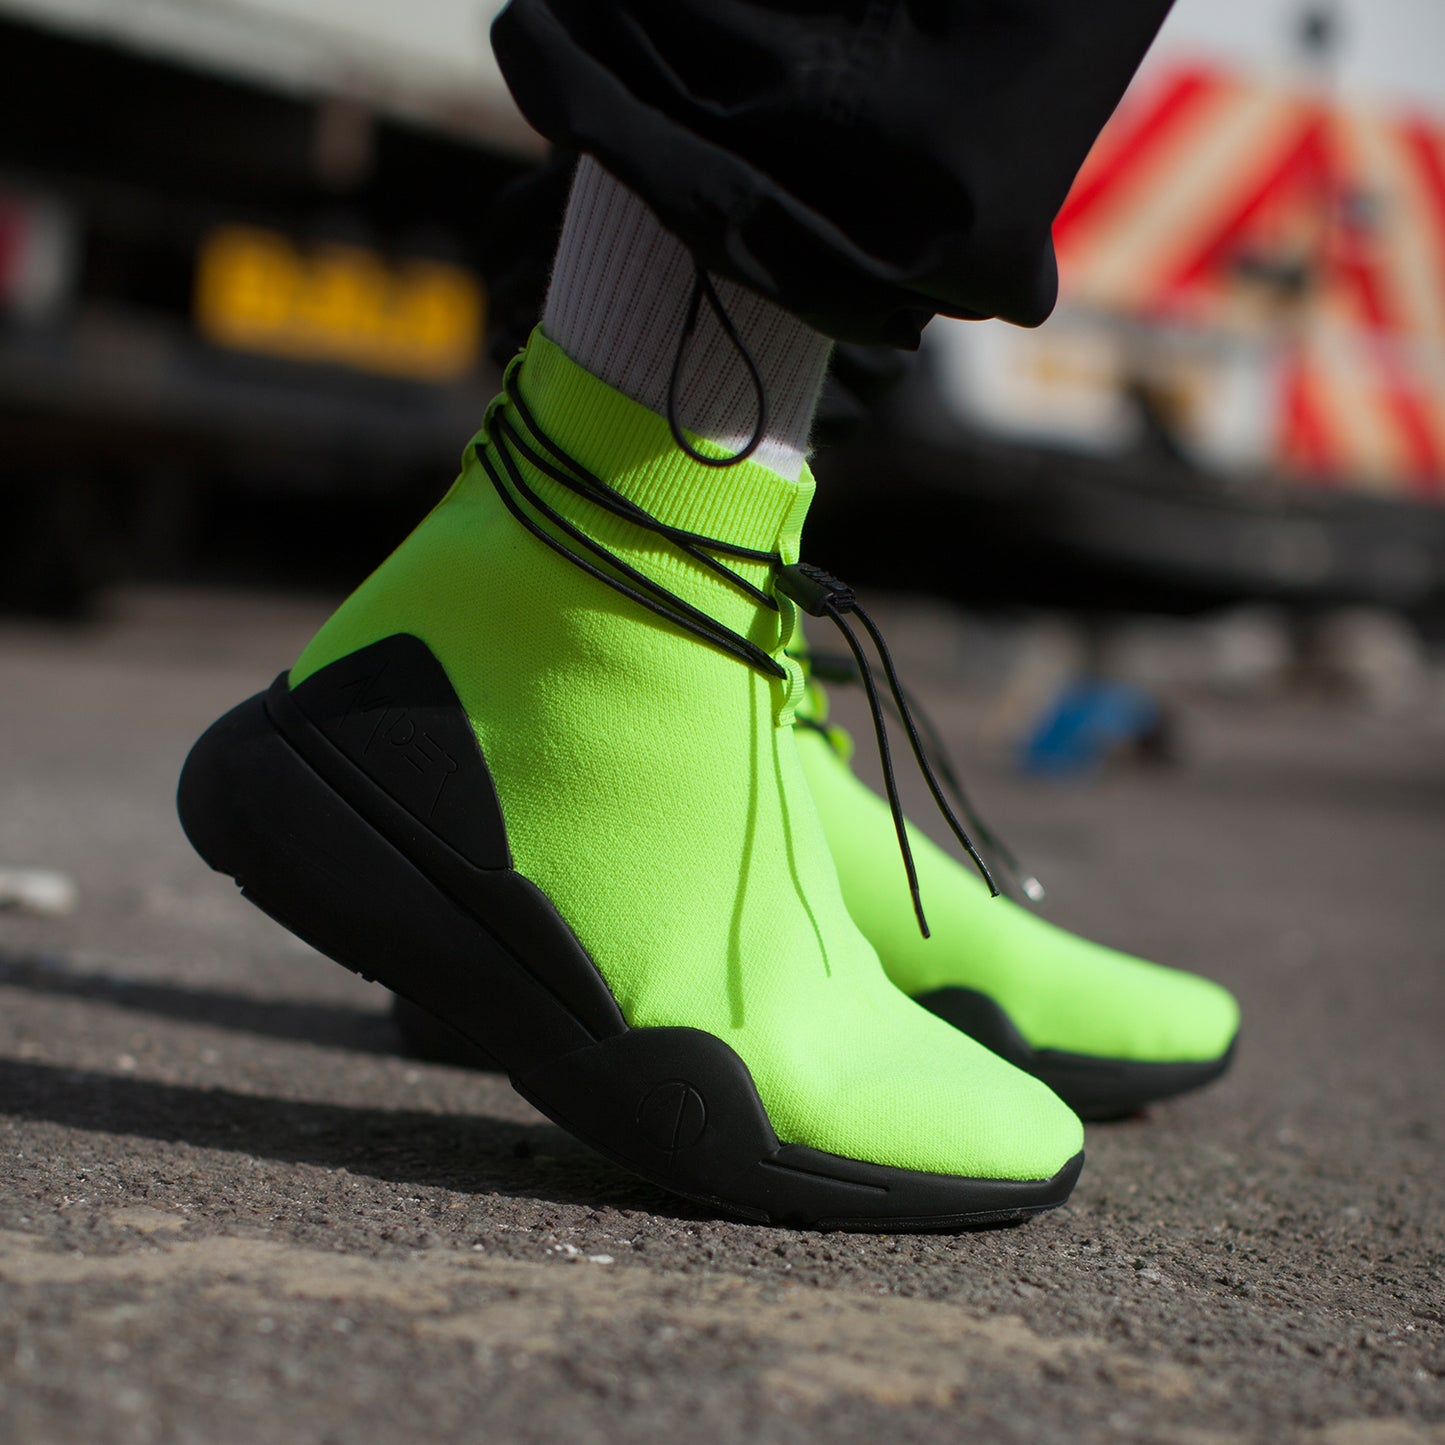 ELLIPSIS GYM SOCK TRAINER IN NEON AND BLACK